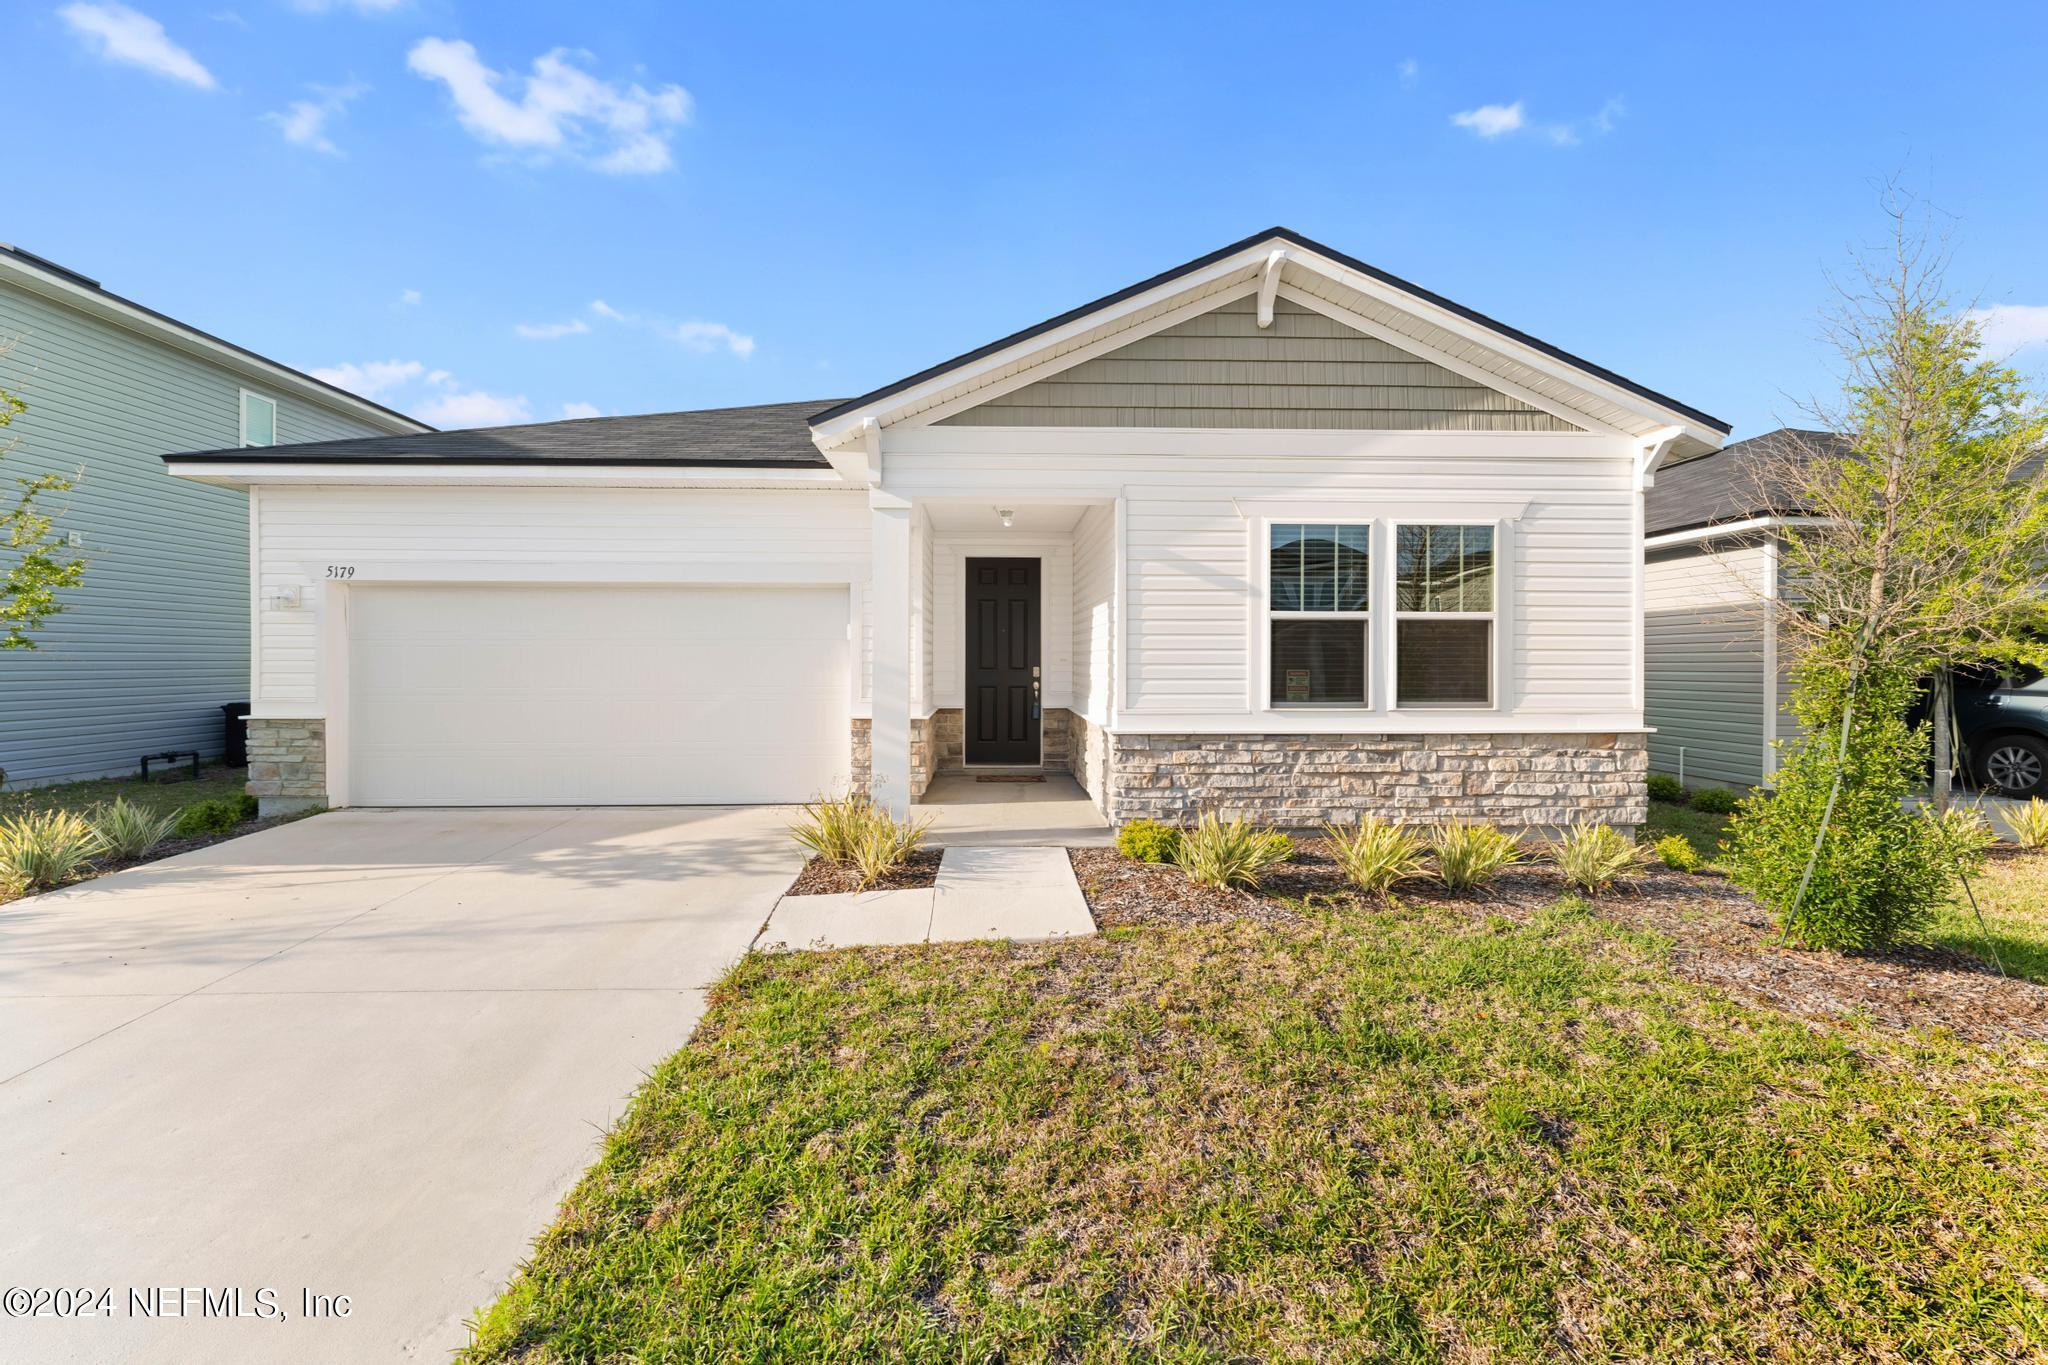 Jacksonville, FL home for sale located at 5179 Sawmill Point Way, Jacksonville, FL 32210